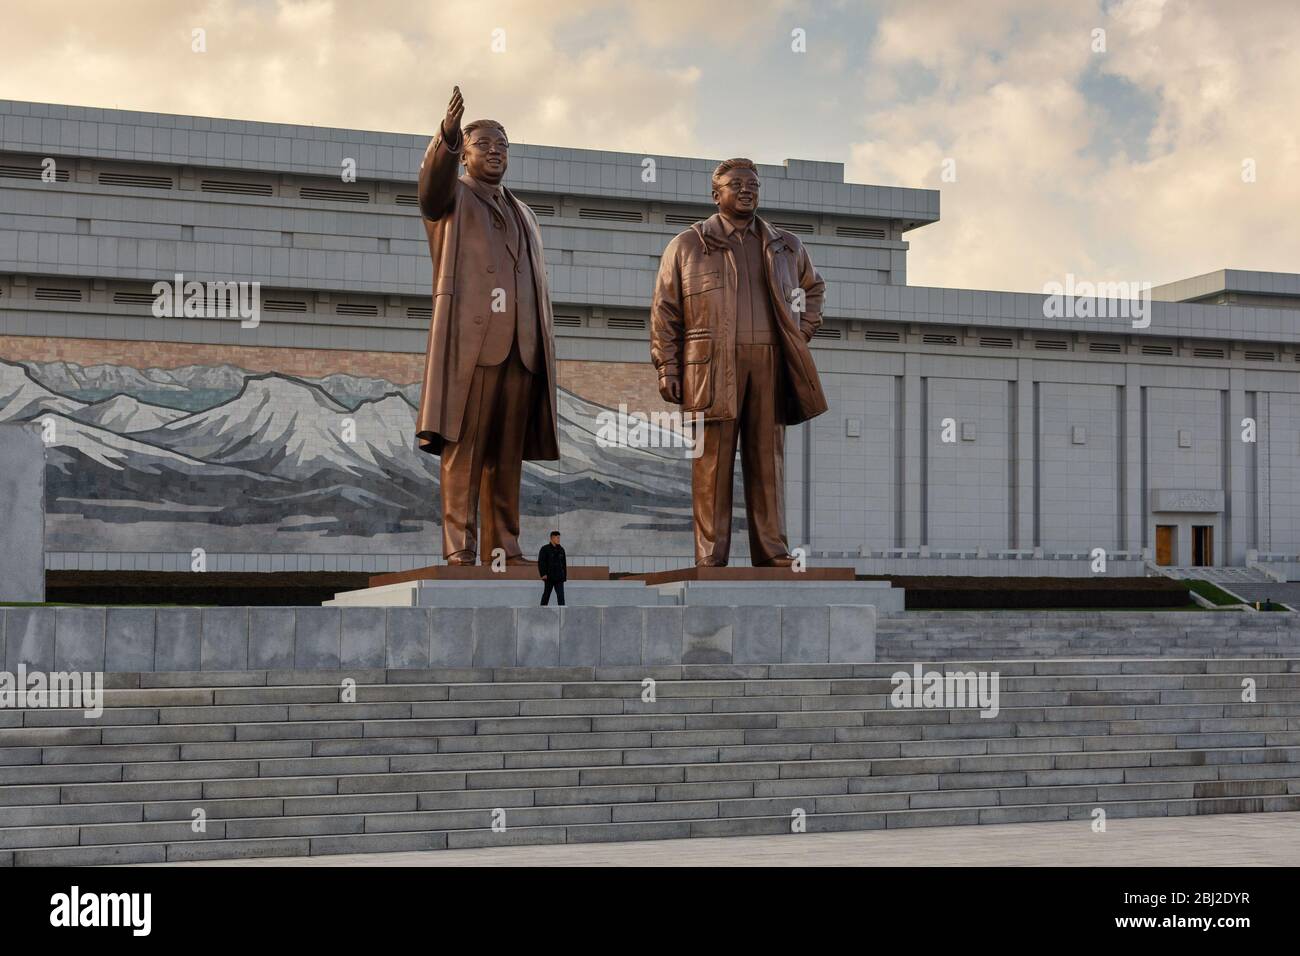 Pyongyang / DPR Korea - November 12, 2015: Bronze statues of deceased supreme North Korean leaders Kim Il-sung and Kim Jong-il at the Grand Monument o Stock Photo